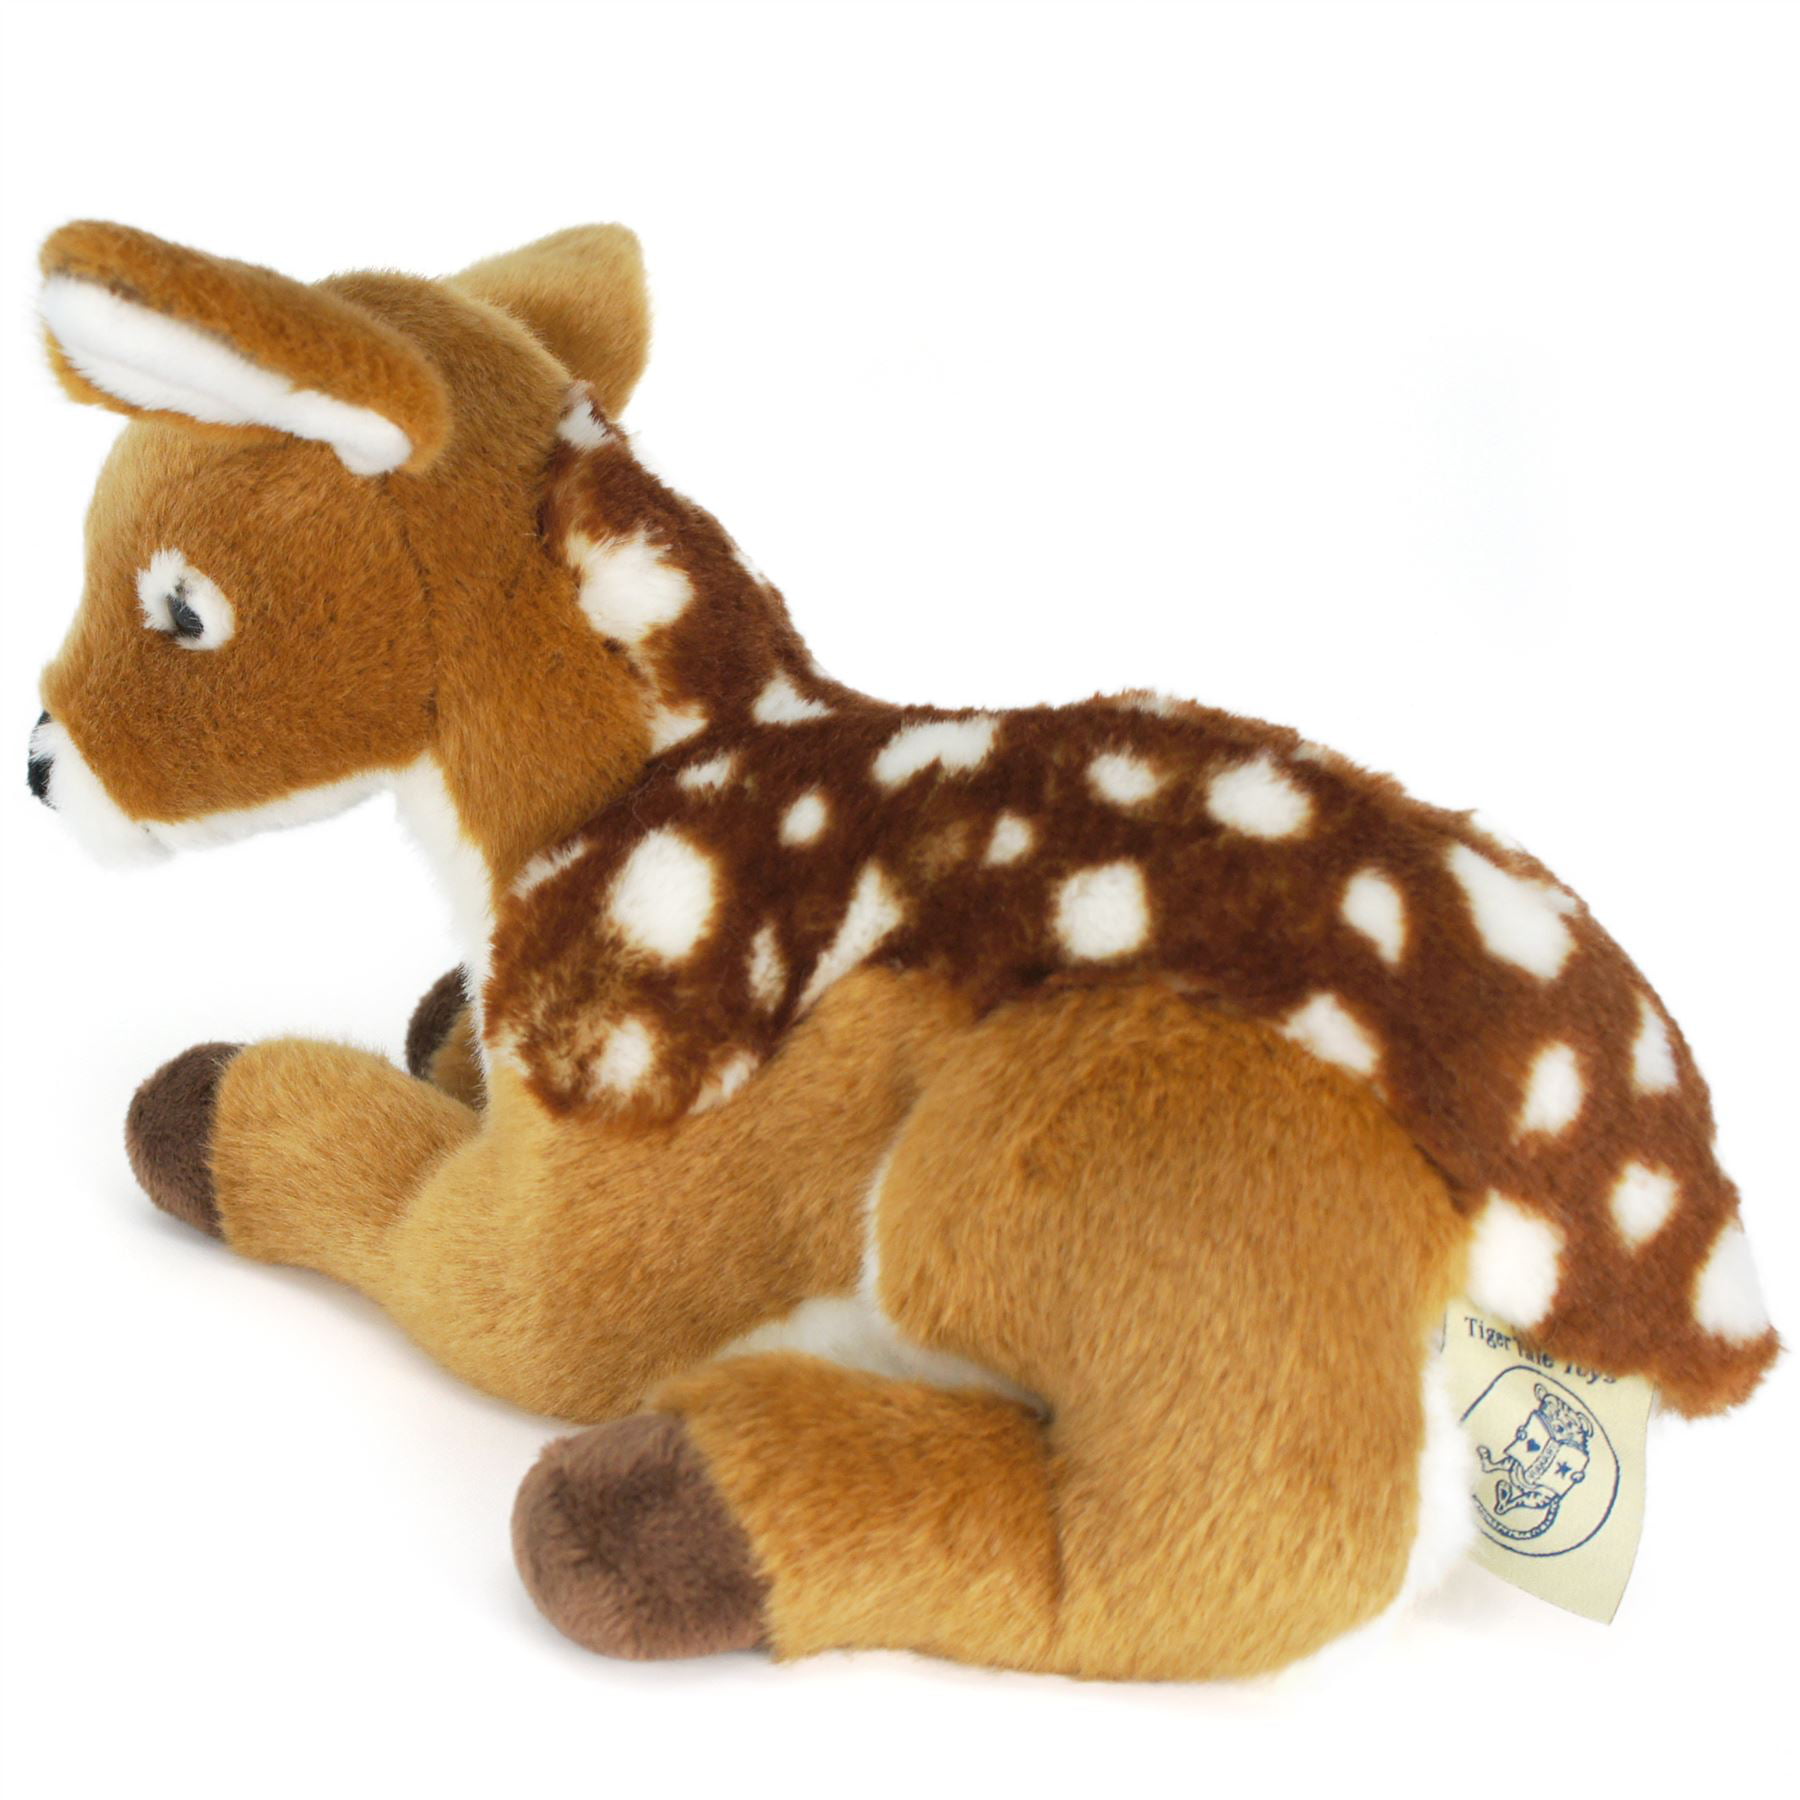 Debbie the Baby Deer | 10 Inch Fawn Stuffed Animal Plush | By Tiger Tale  Toys 